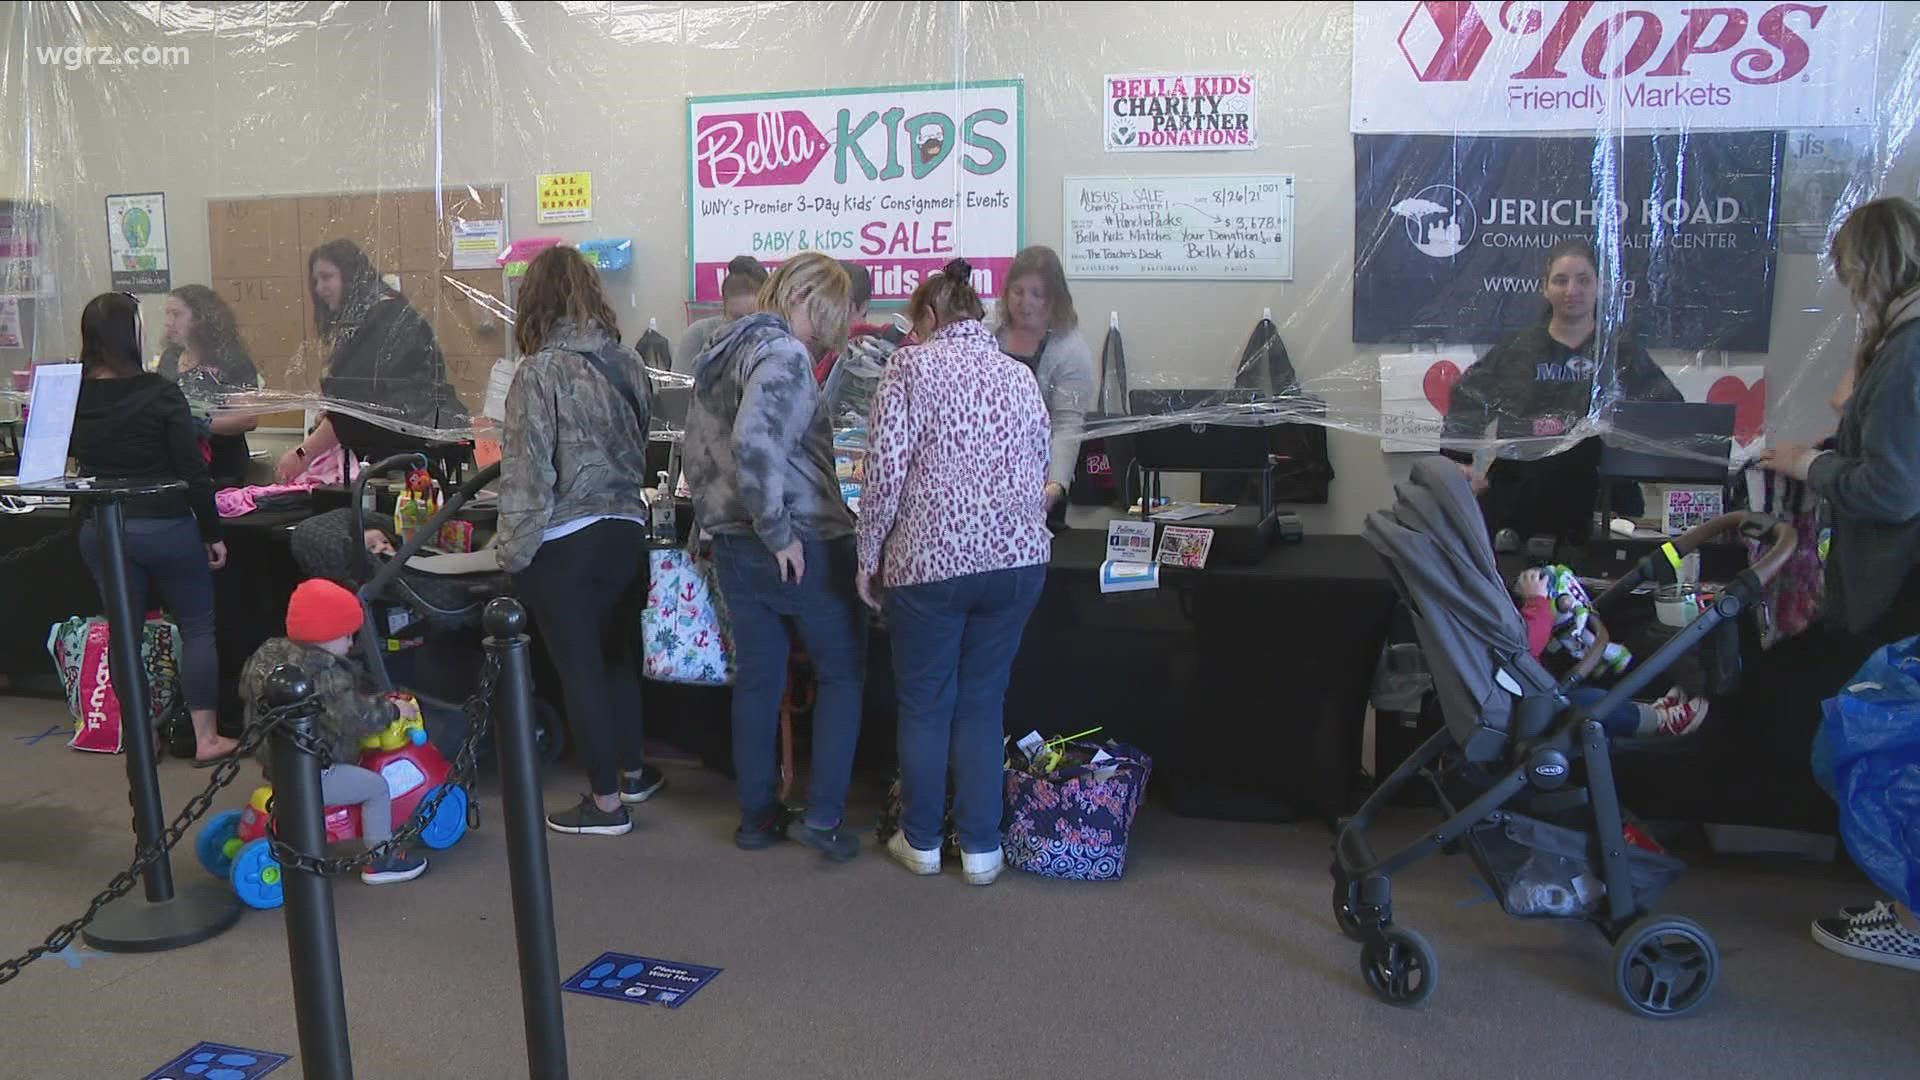 Bella Kids Pop Up shop this weekend on Transit Road in Williamsville celebrating 10 years